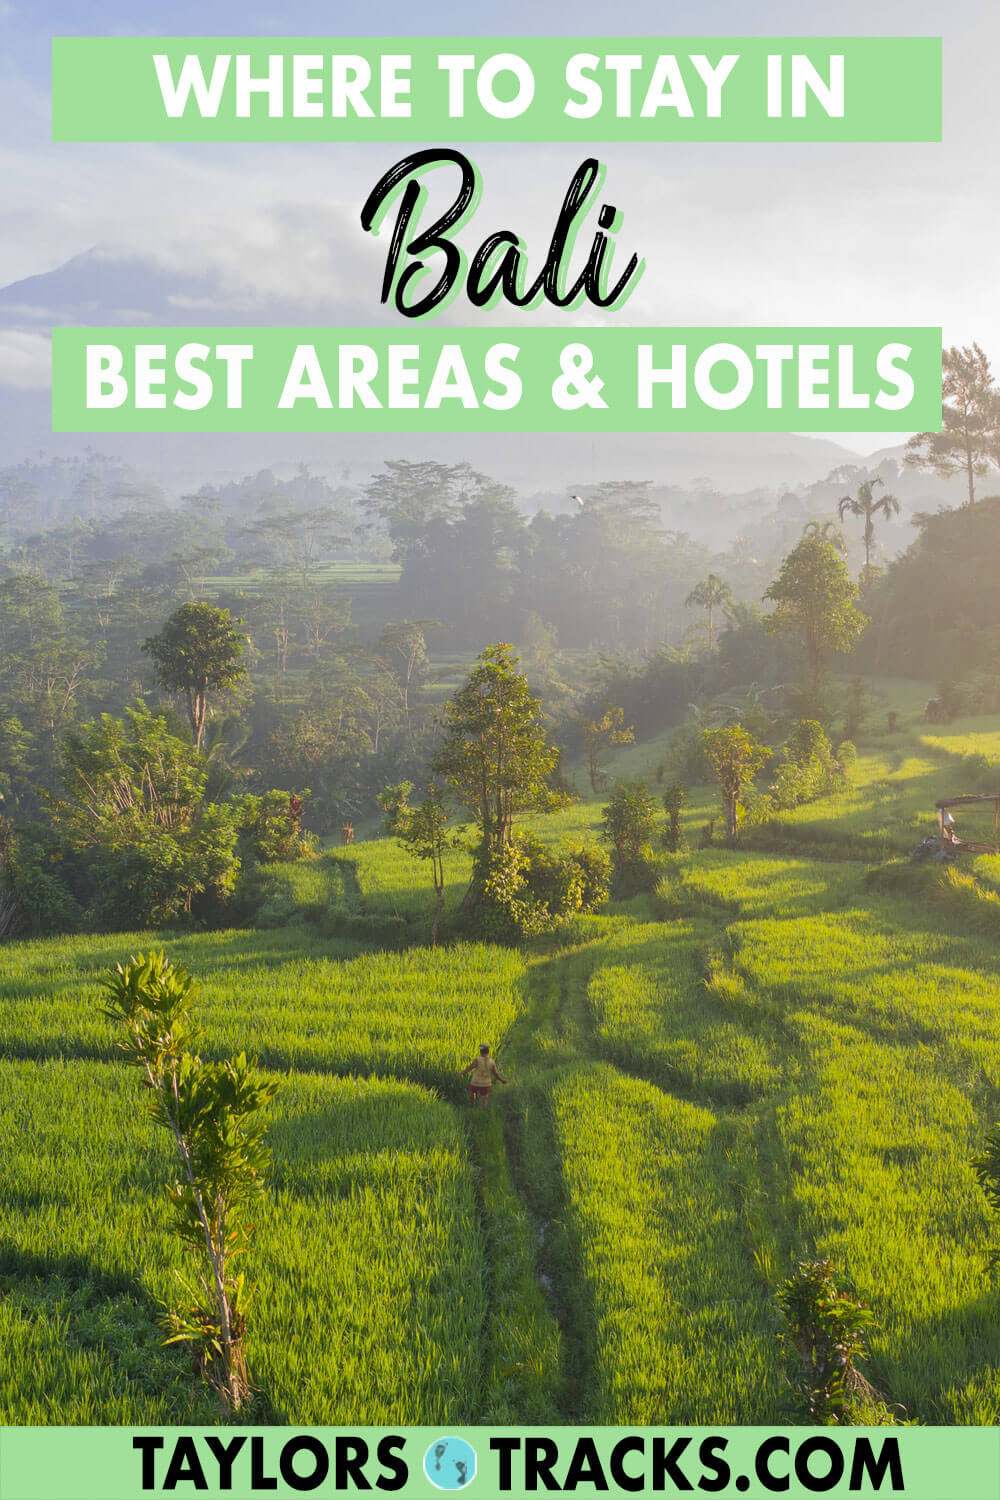 Where to Stay in Bali - Best Places to Stay in Bali by Area & Hotels